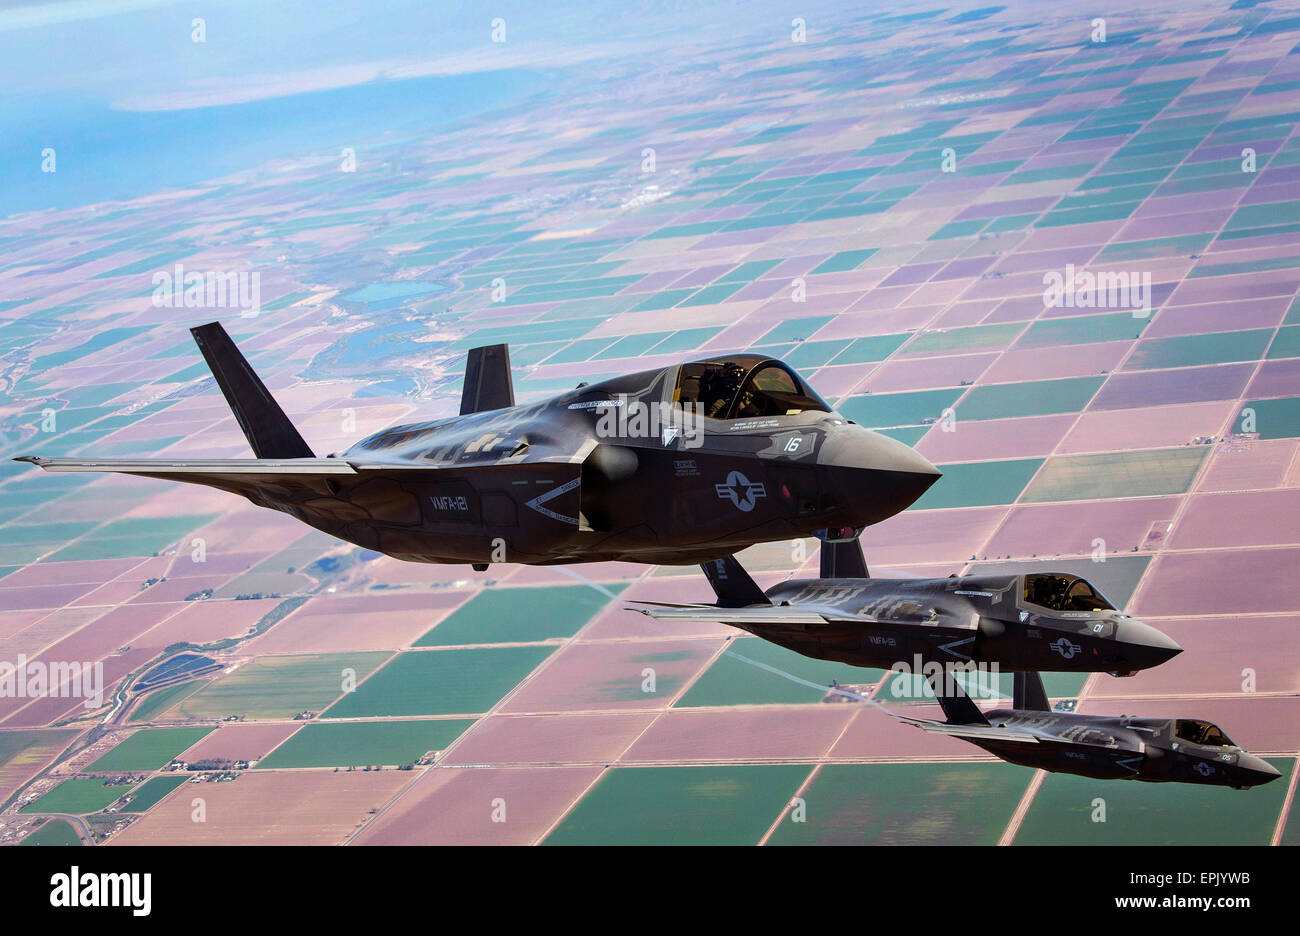 U.S. Marine Corps F-35B Lightning II Joint Strike Fighters fly in formation during fixed-wing aerial refueling training exercise August 27, 2013 over eastern California. Stock Photo